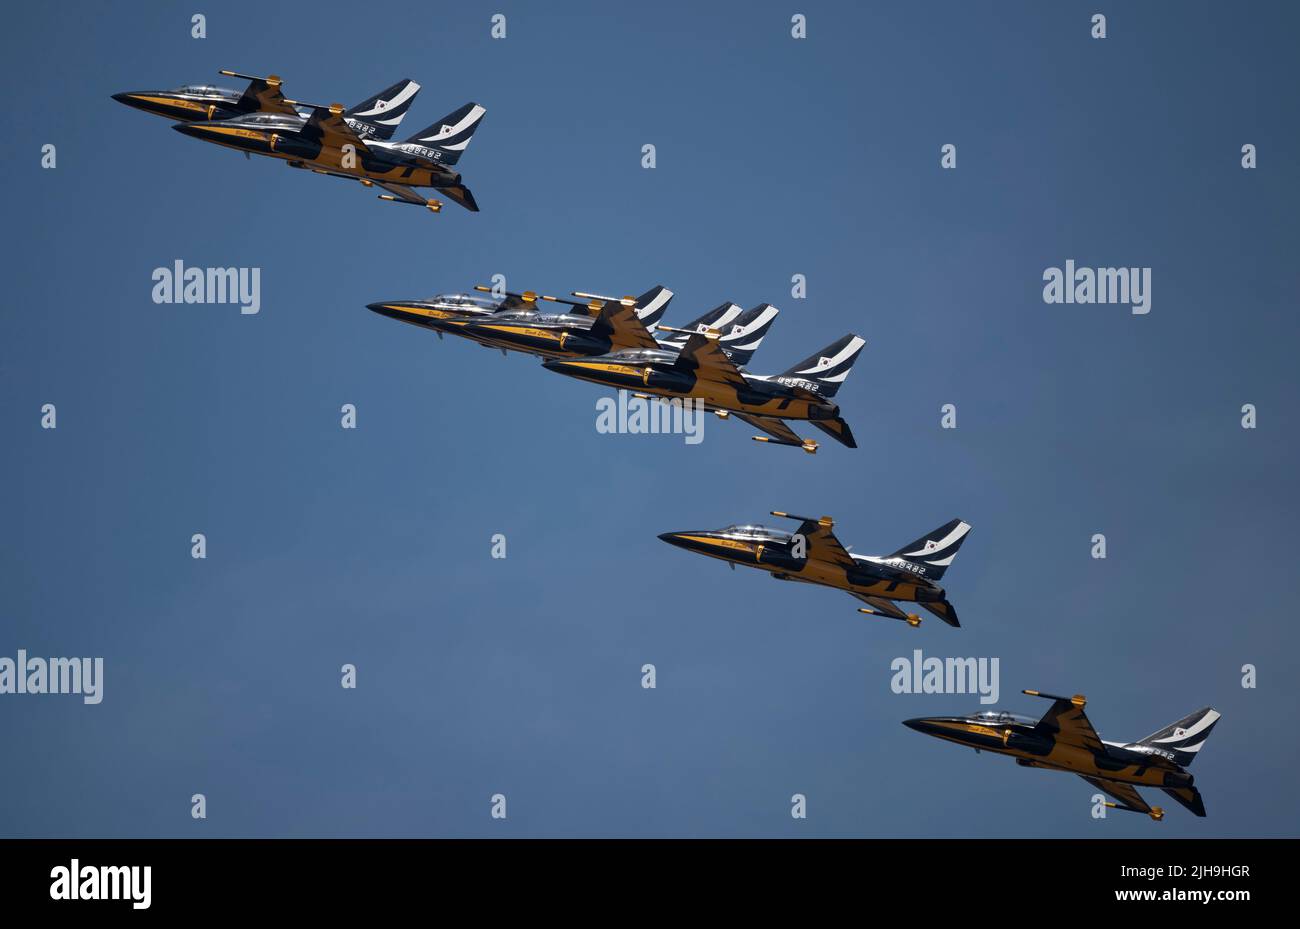 RAF Fairford, Gloucester, UK. 16 July 2022. Several hundred military aircraft of all shapes and sizes, from all eras and countries of the world, gather for one of the world’s largest airshows. Image: Military aerobatic teams display their flying skills. The Republic of Korea Air Force Black Eagles in action. Credit: Malcolm Park/Alamy Live News Stock Photo